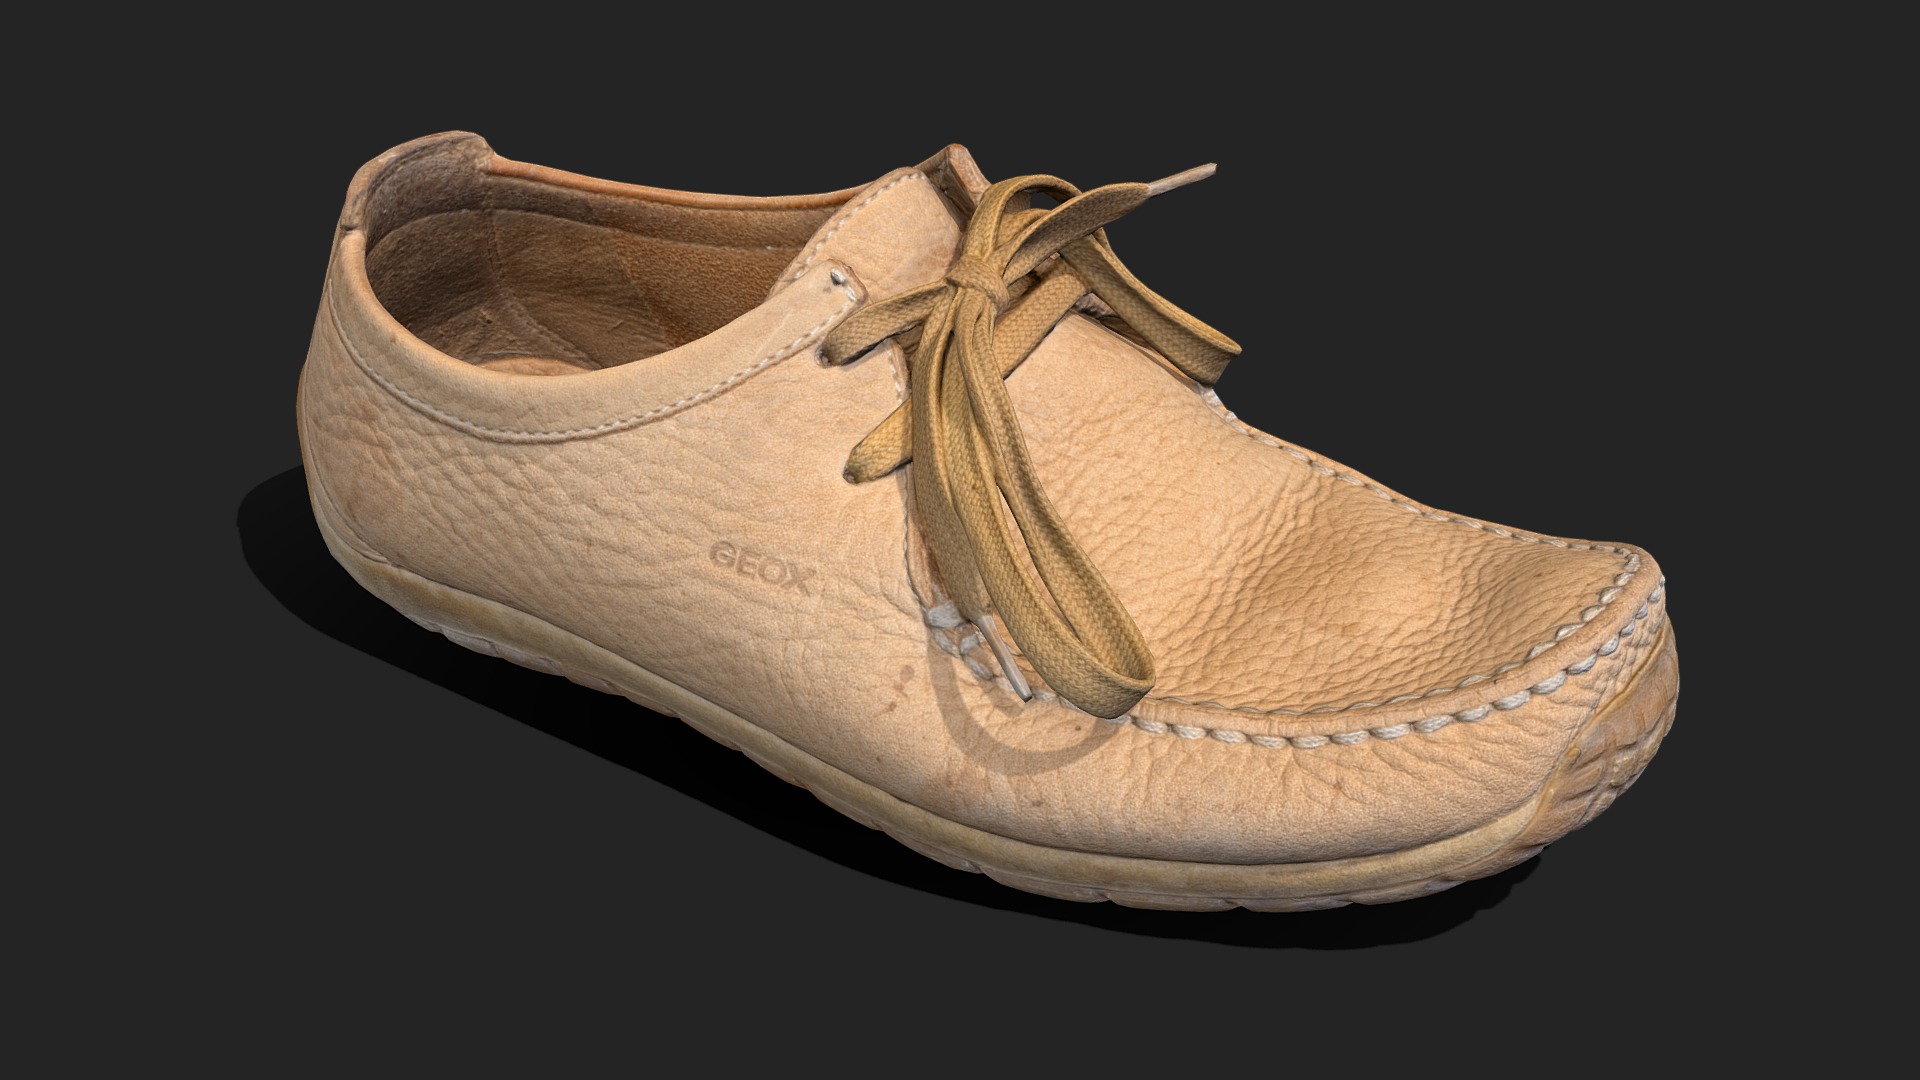 3D model My Father’s Old Shoes - This is a 3D model of the My Father's Old Shoes. The 3D model is about a brown leather boot.